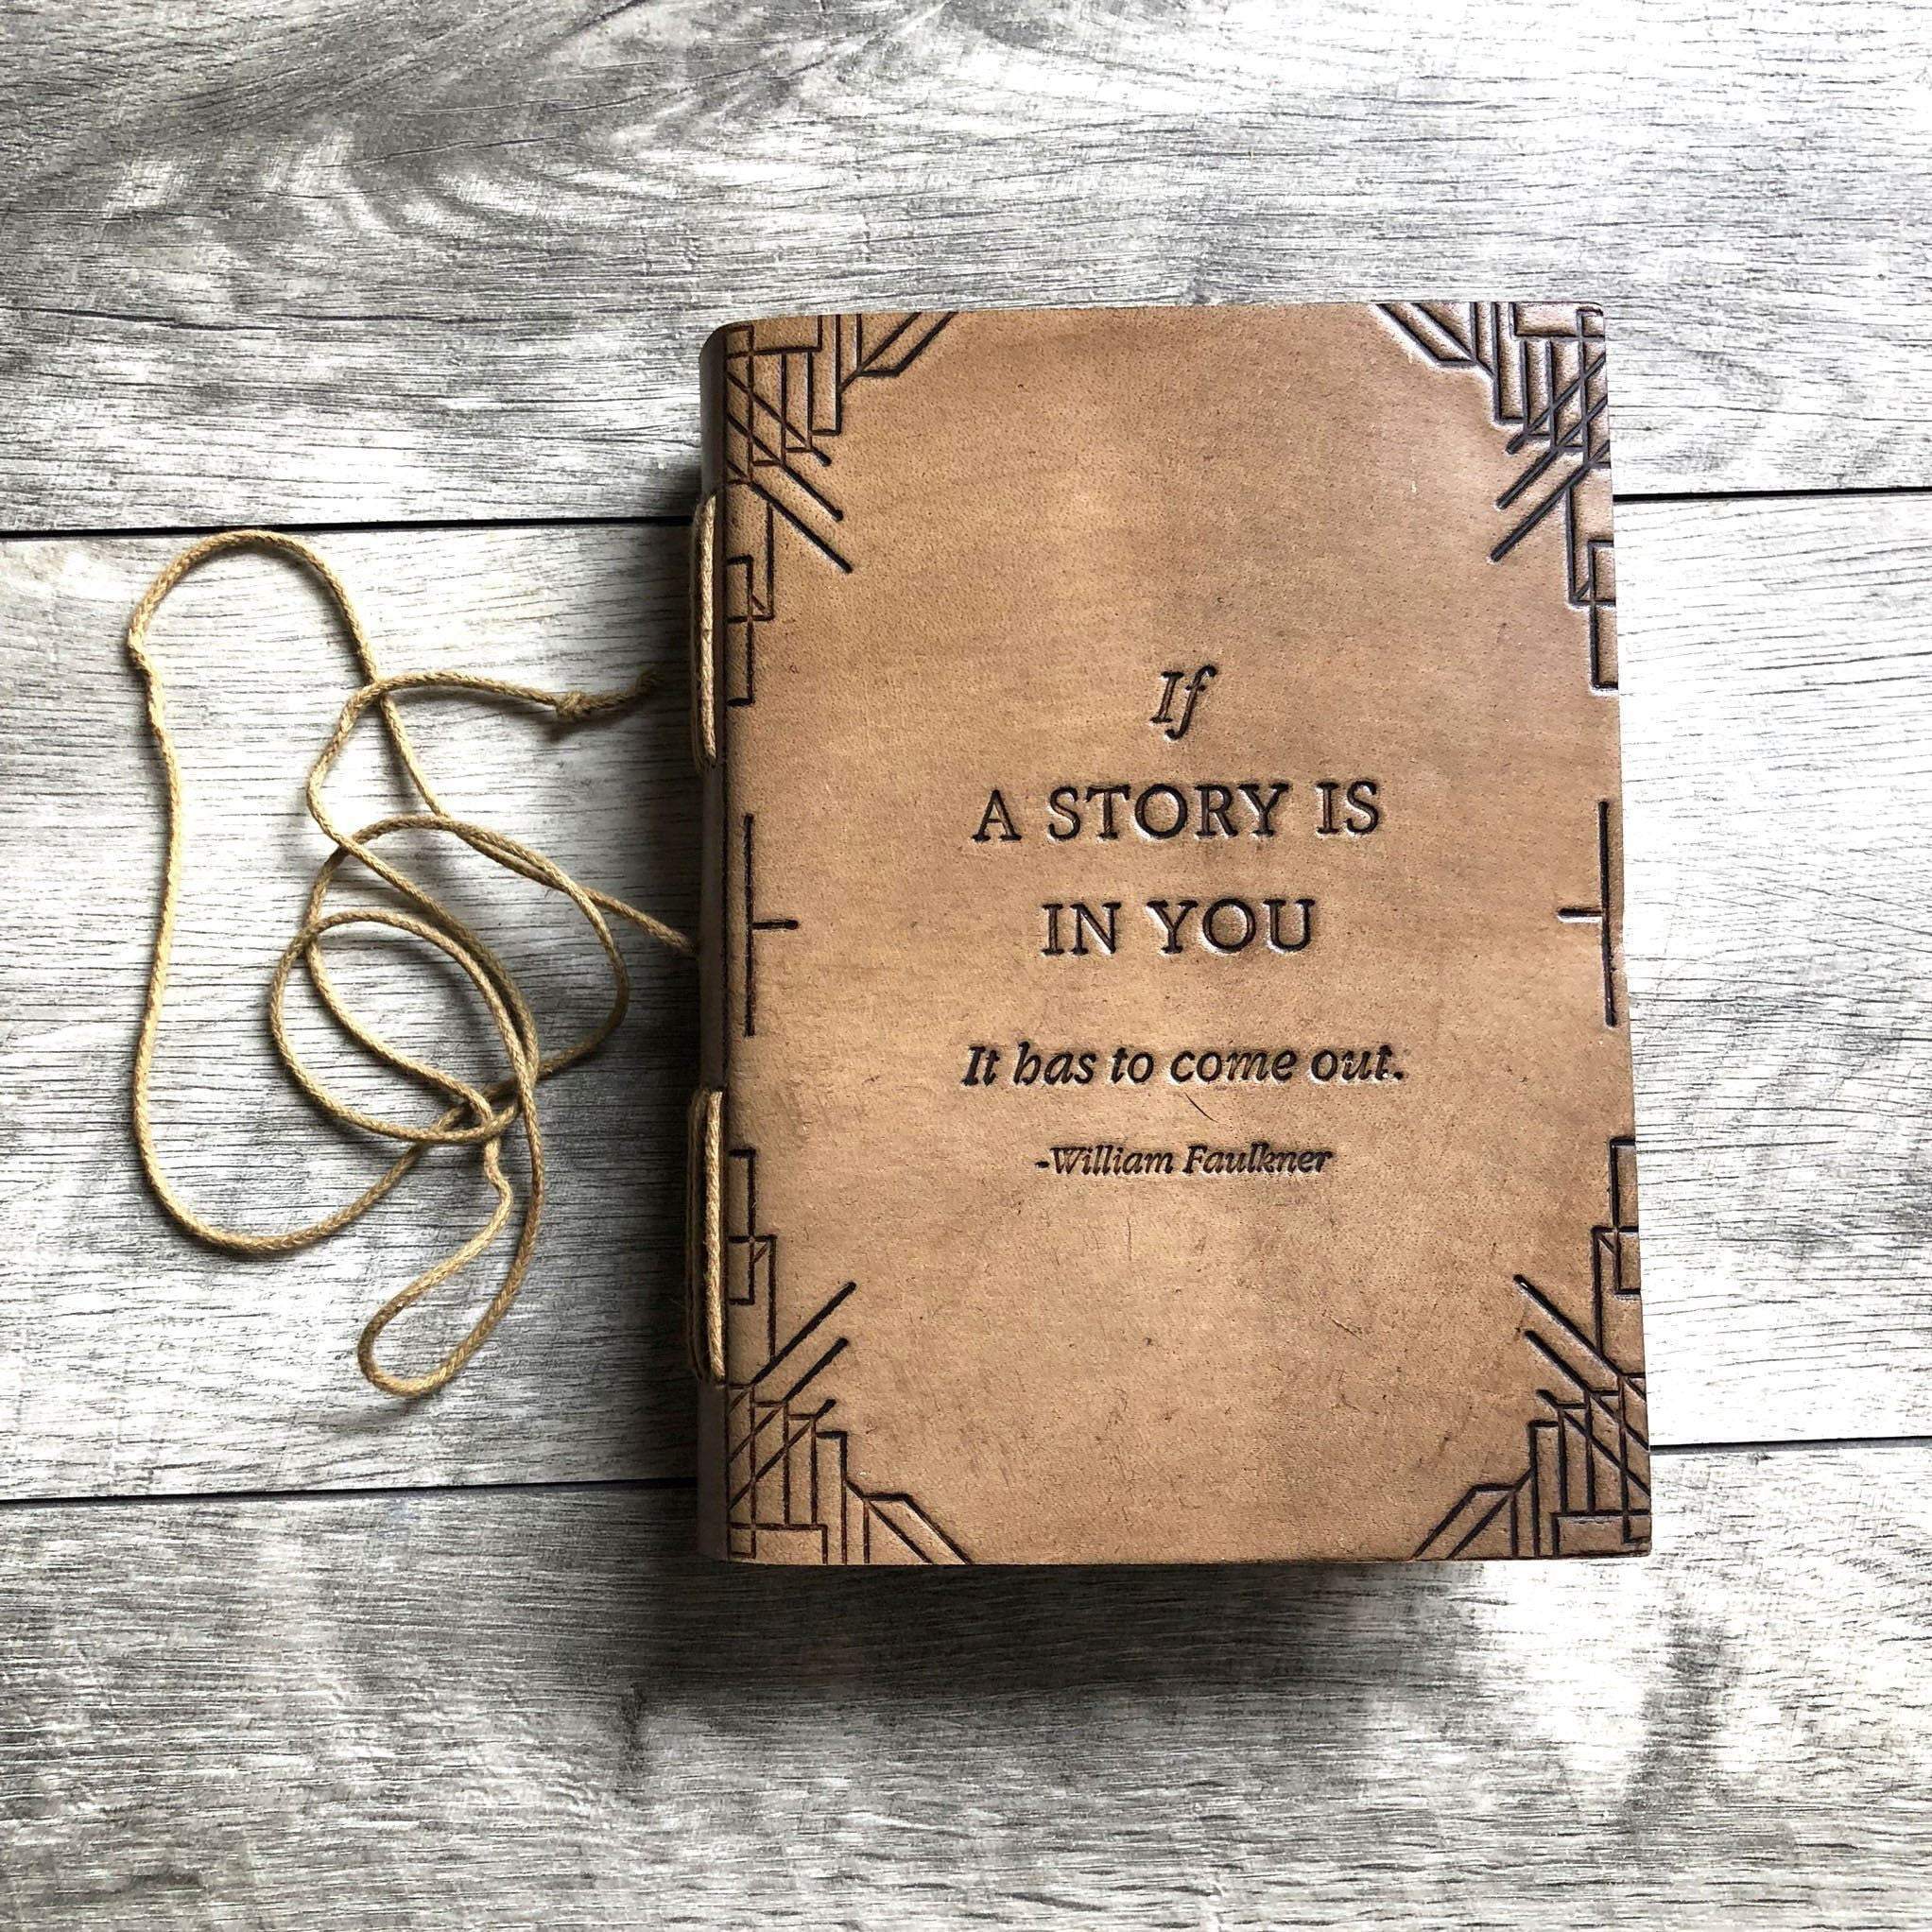 "If A Story" Handmade Blonde Leather Journal